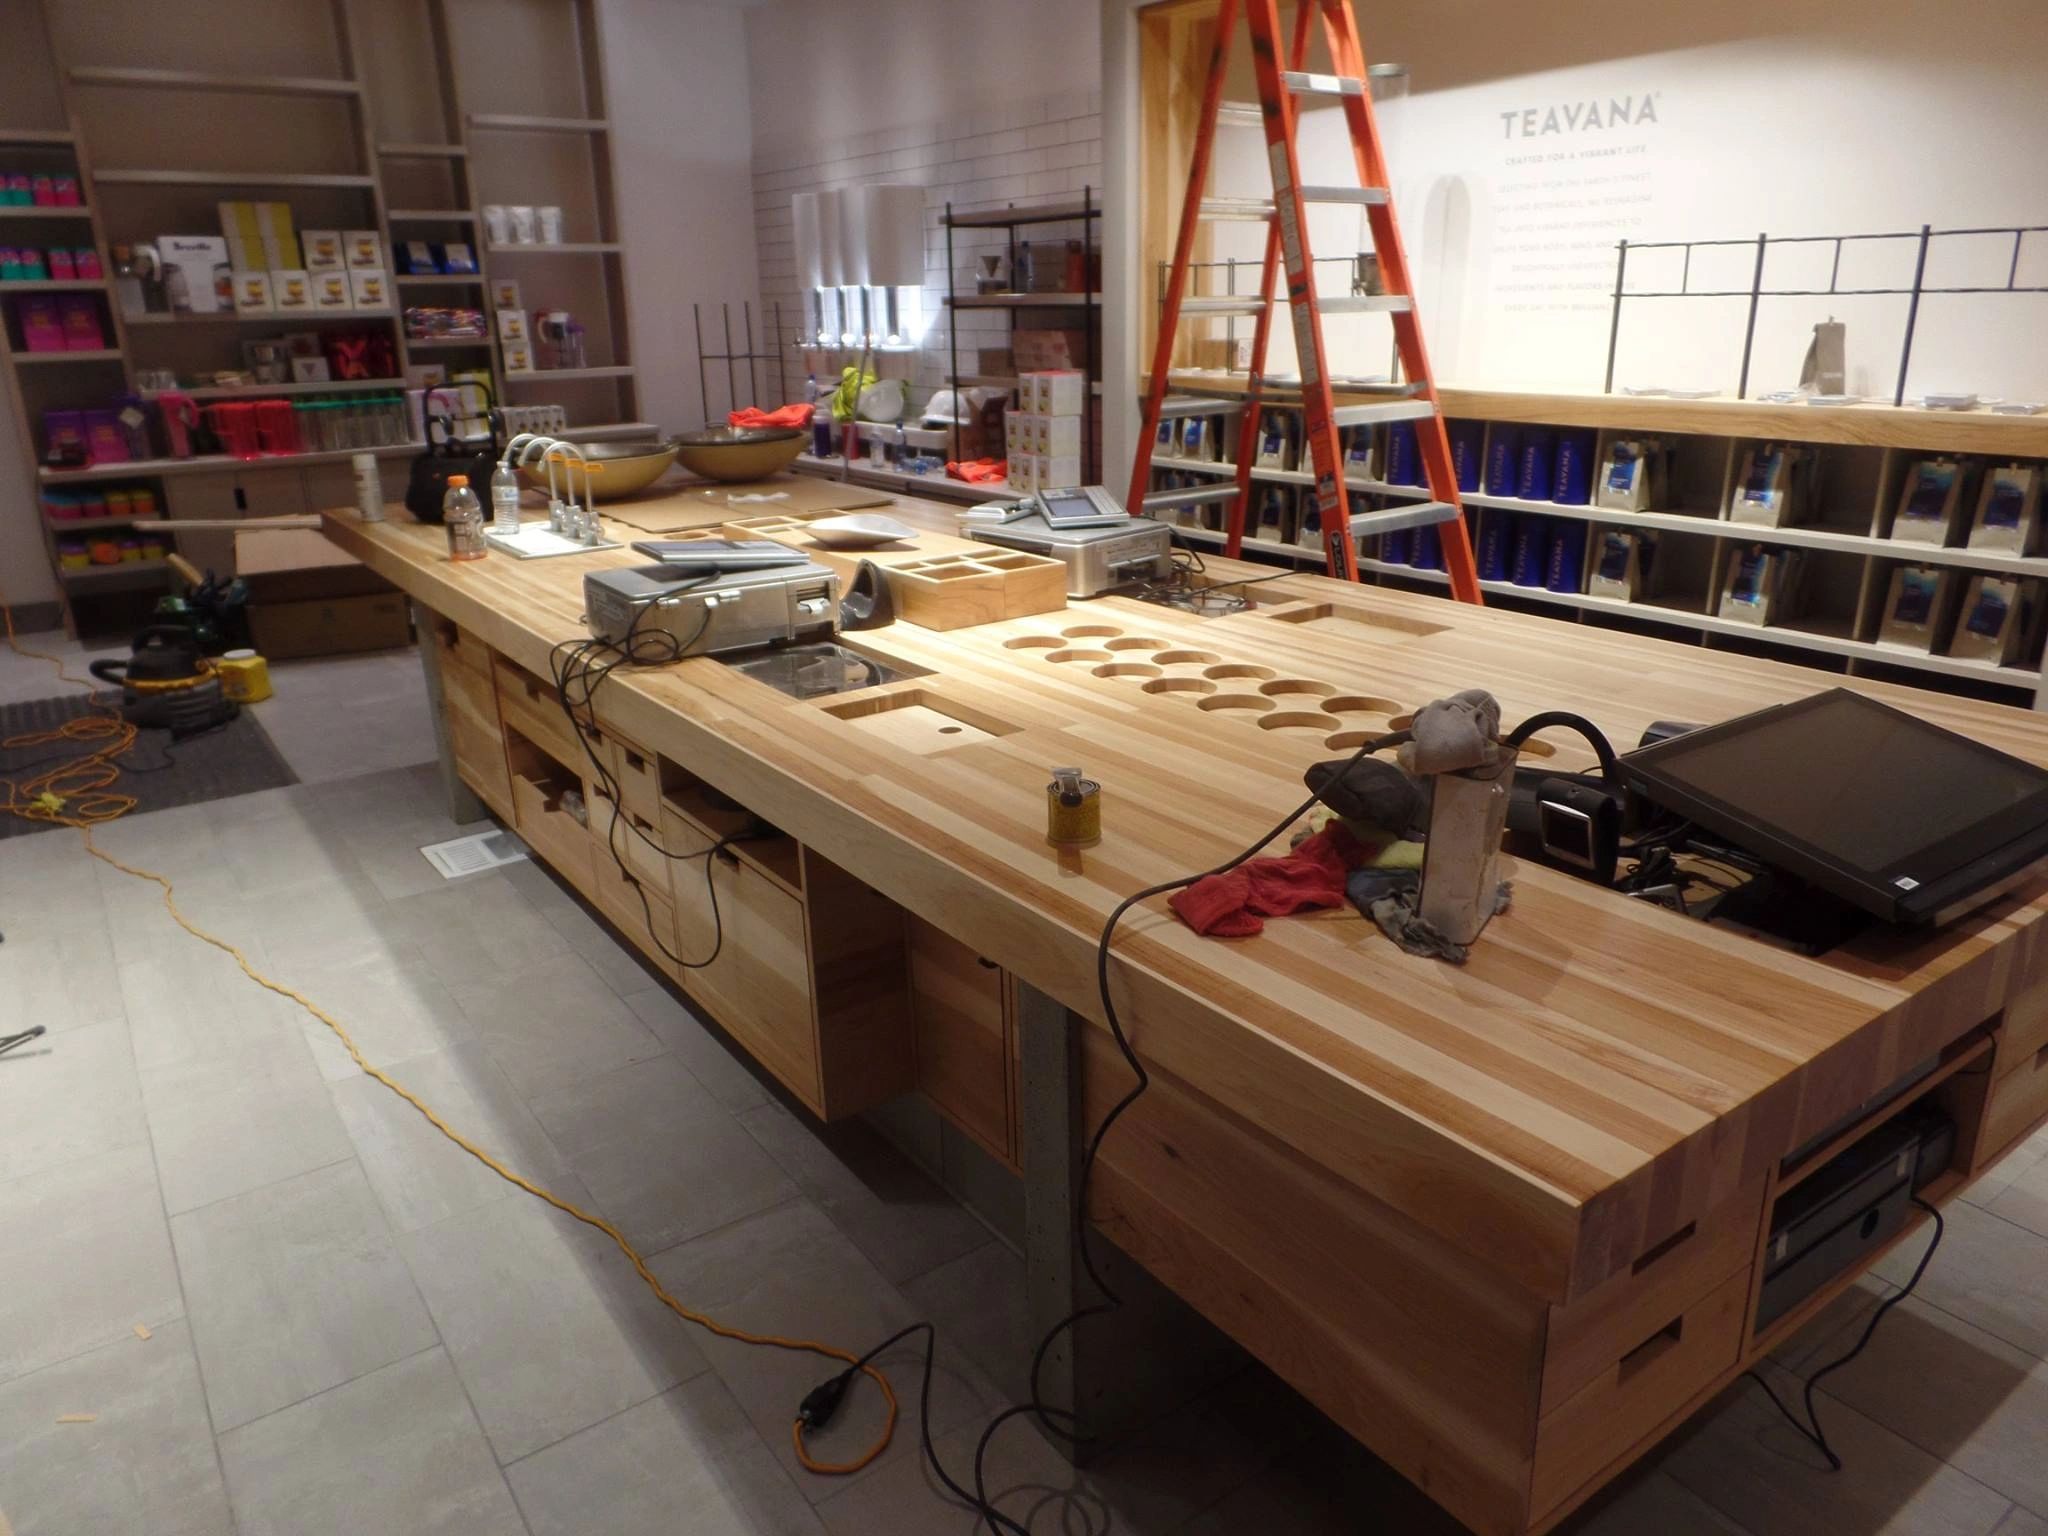 Router work at Teavana for display table